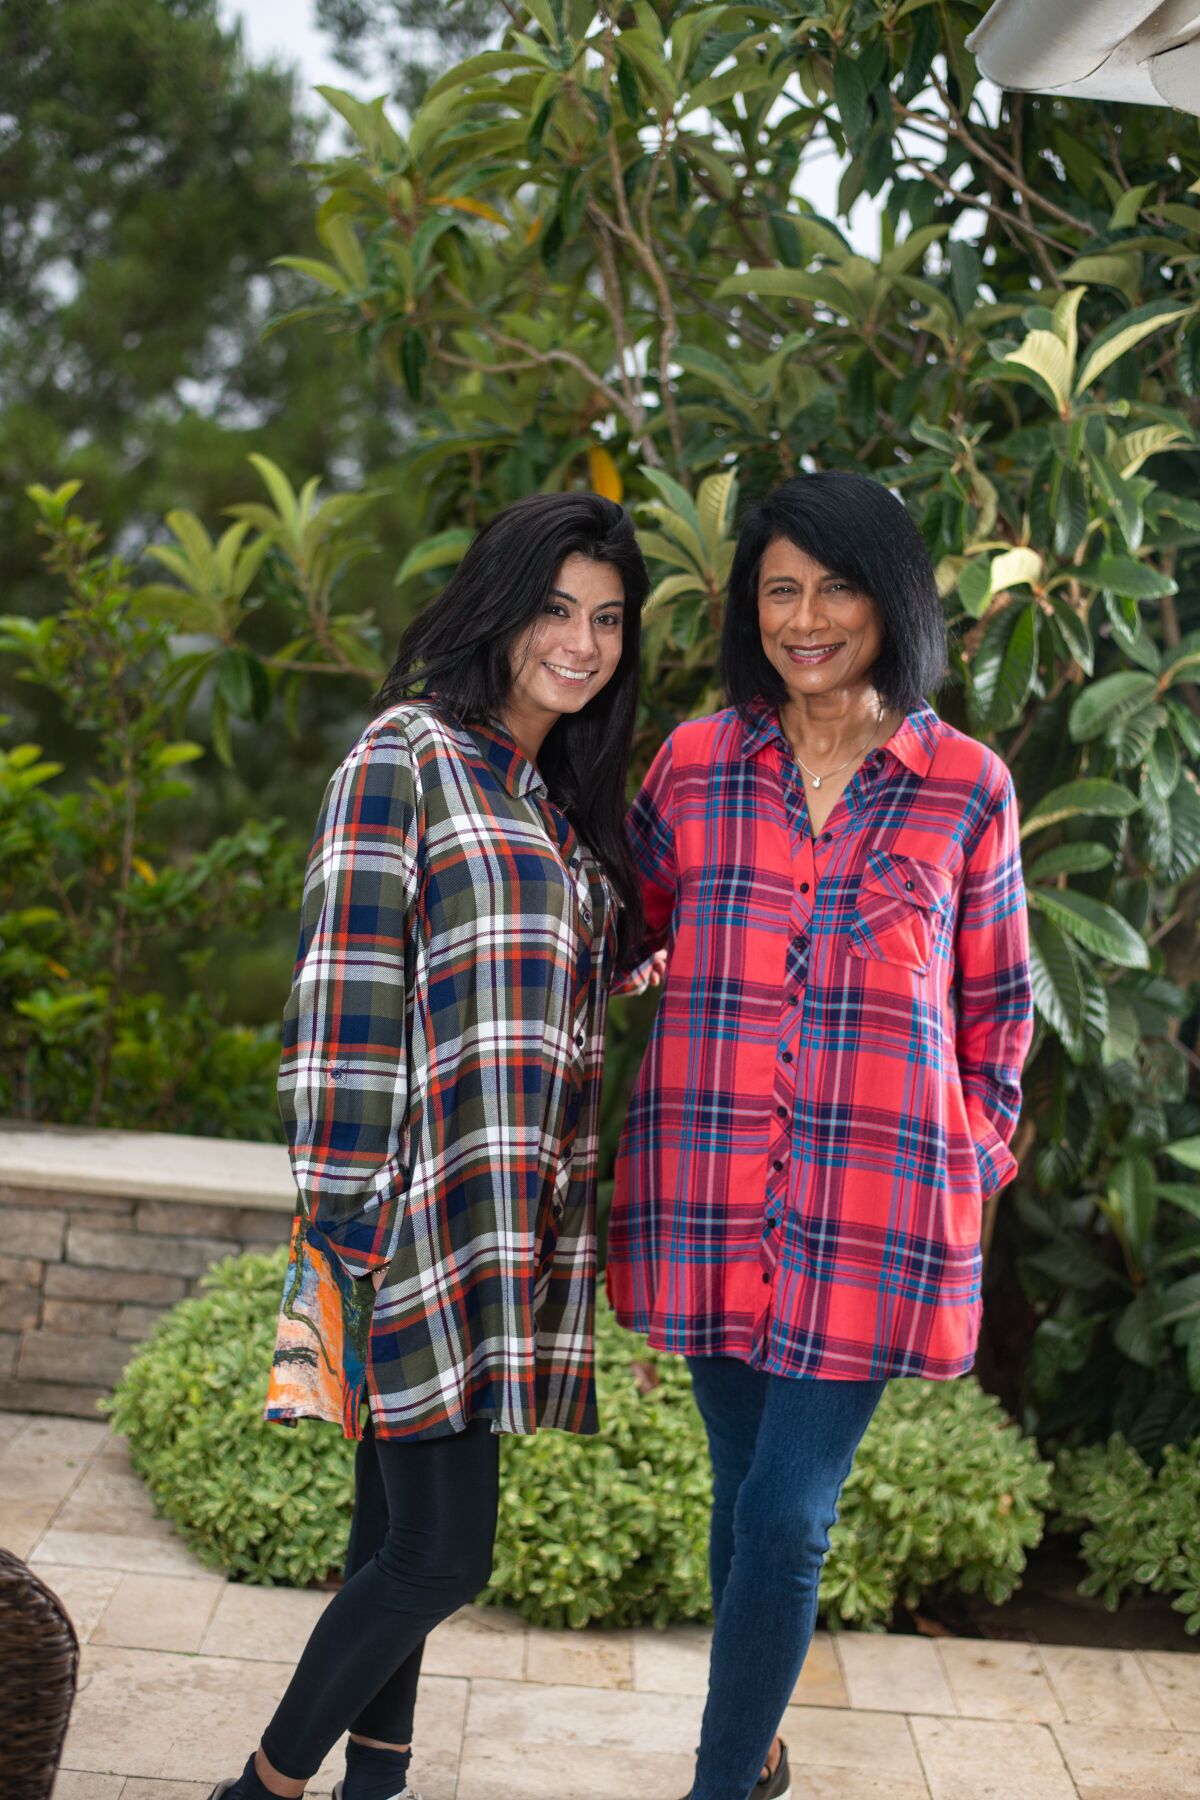 Mother-daughter team: Alka and Aishya wearing Tolani plaids.